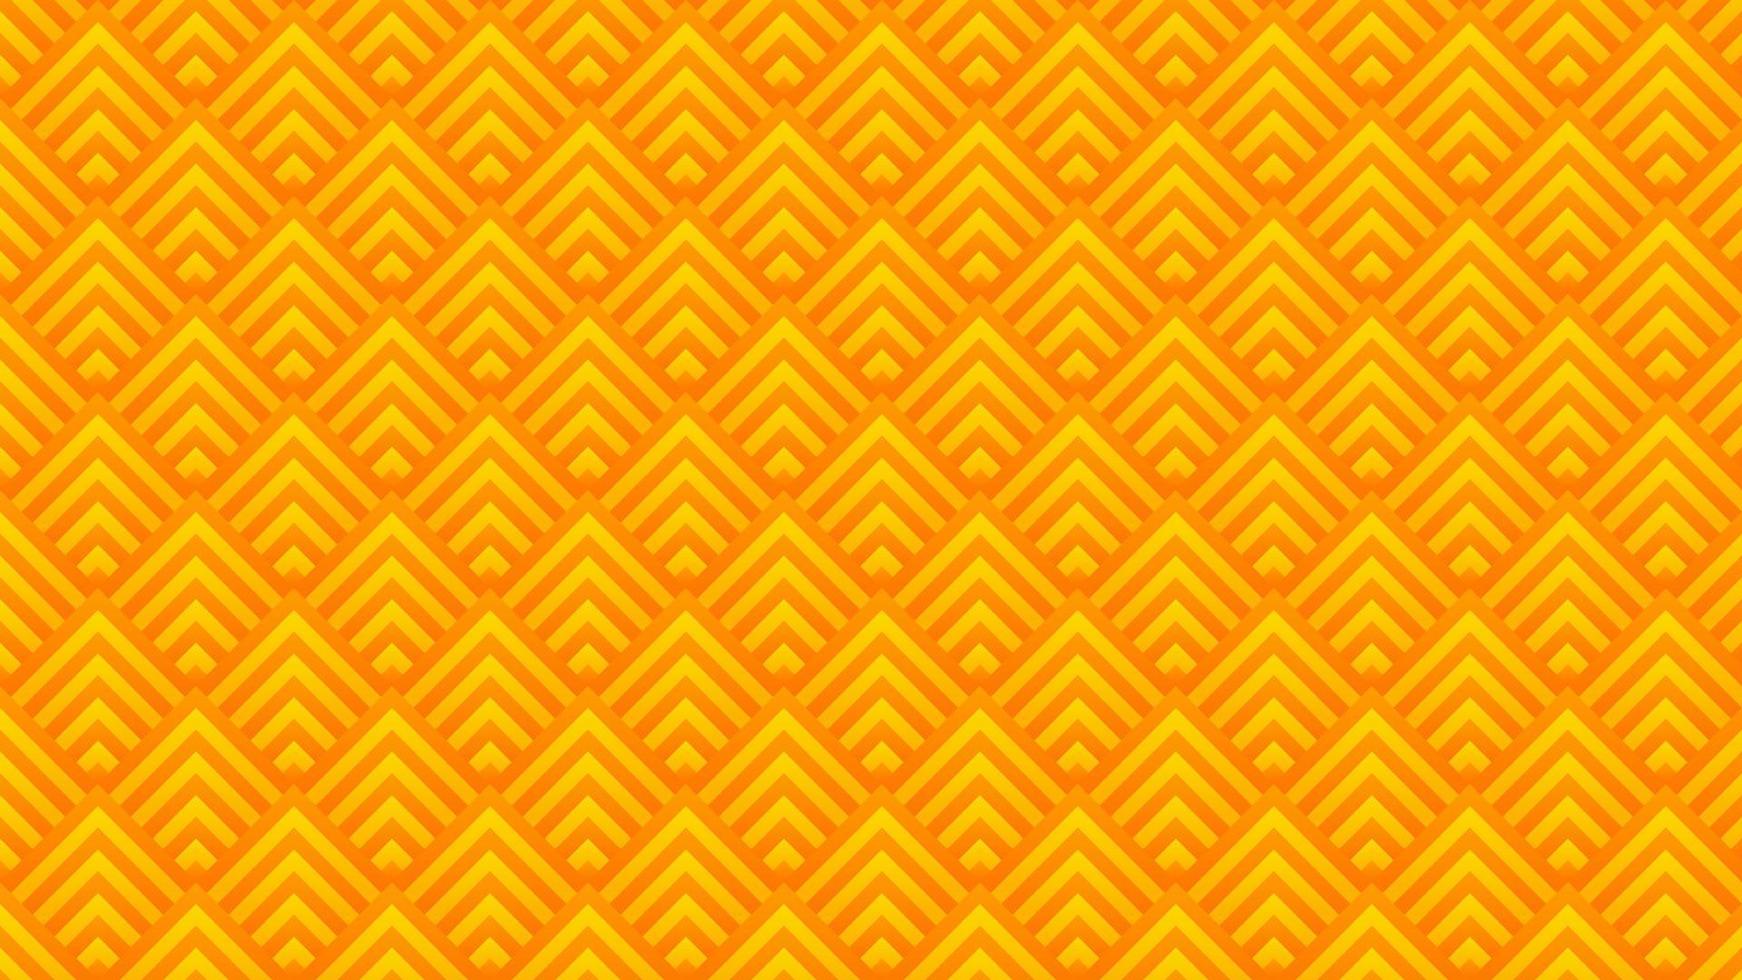 Pattern of 3d optical illusion shape. Pattern of illusion square. Vector illustration of 3d orange rhombus block. Geometric illusive for design graphic, background, wallpaper, layout or art